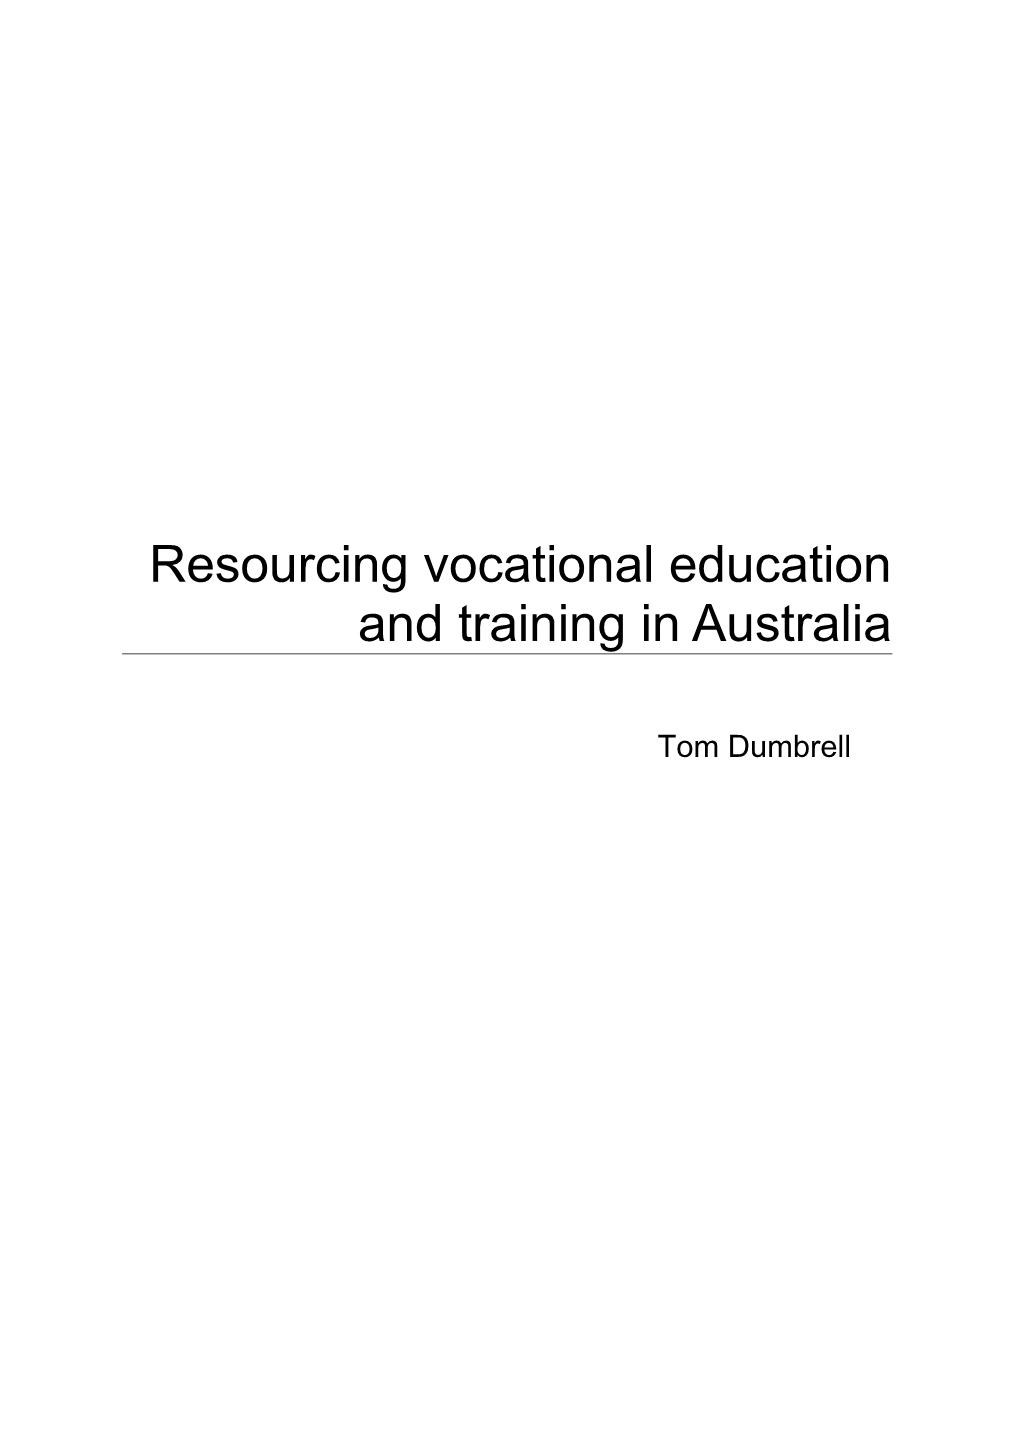 Resourcing Vocational Education and Training in Australia